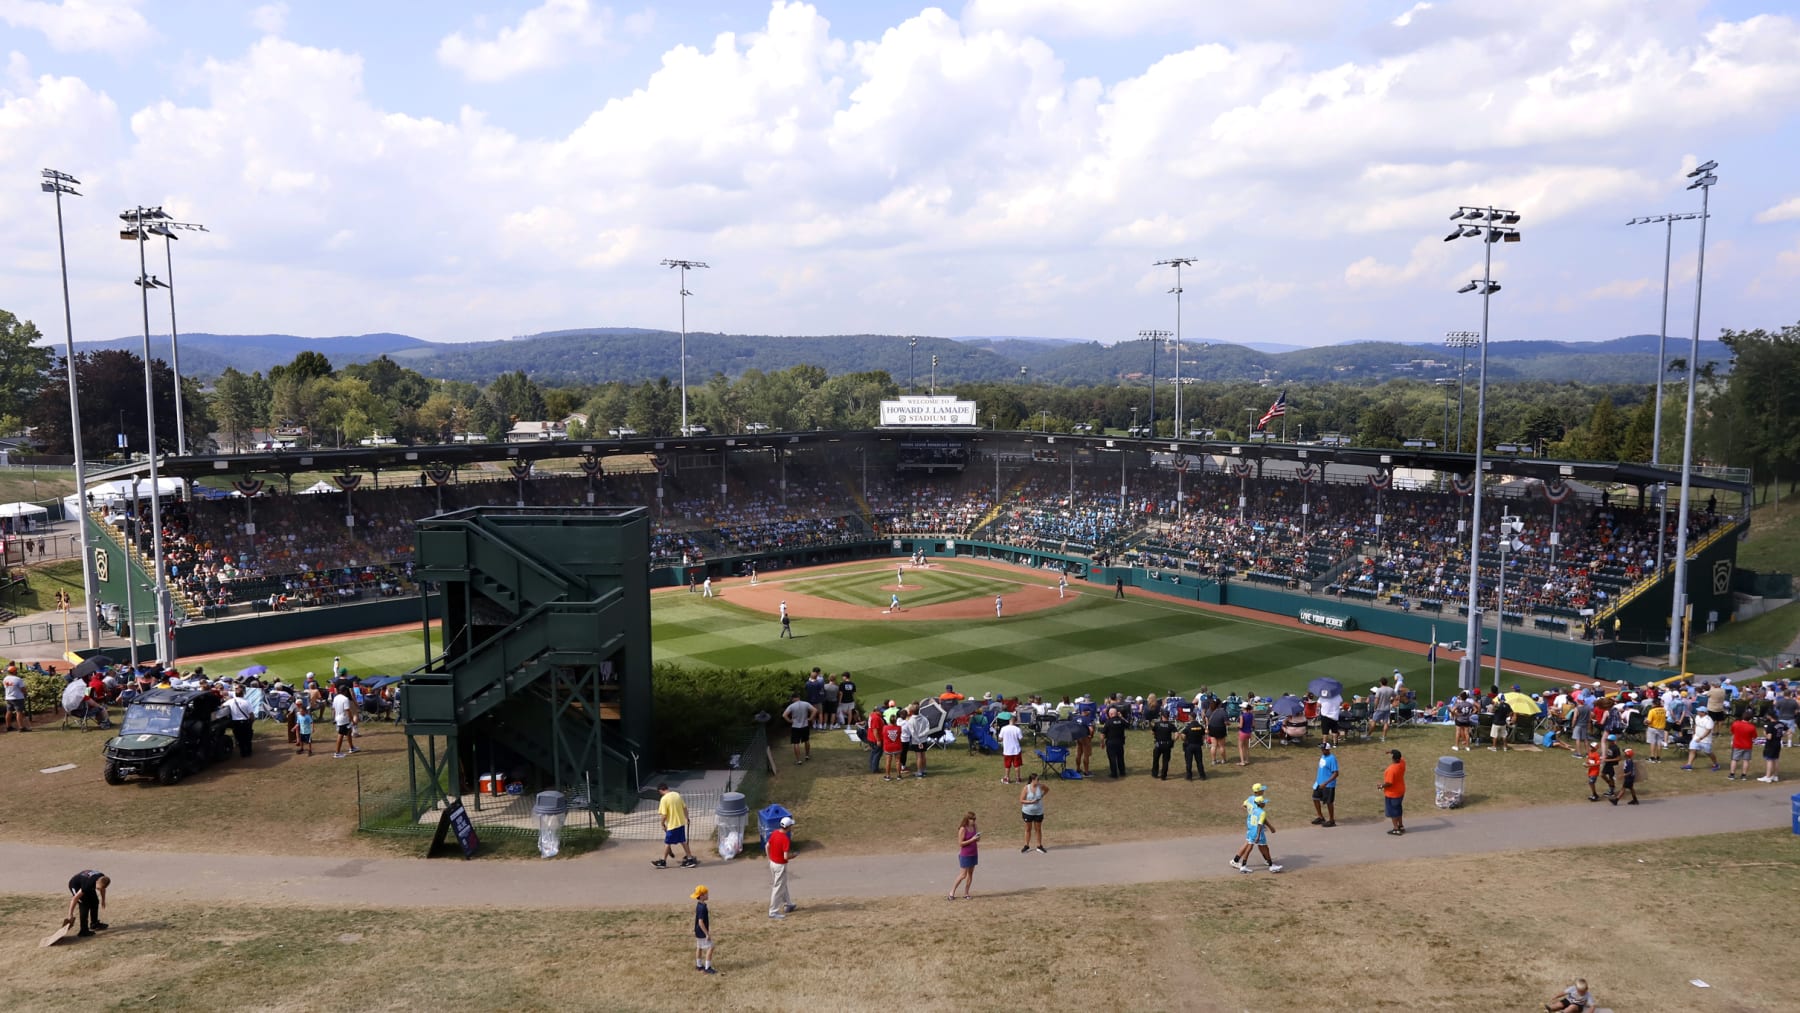 The cost for a Little League World Series Championship